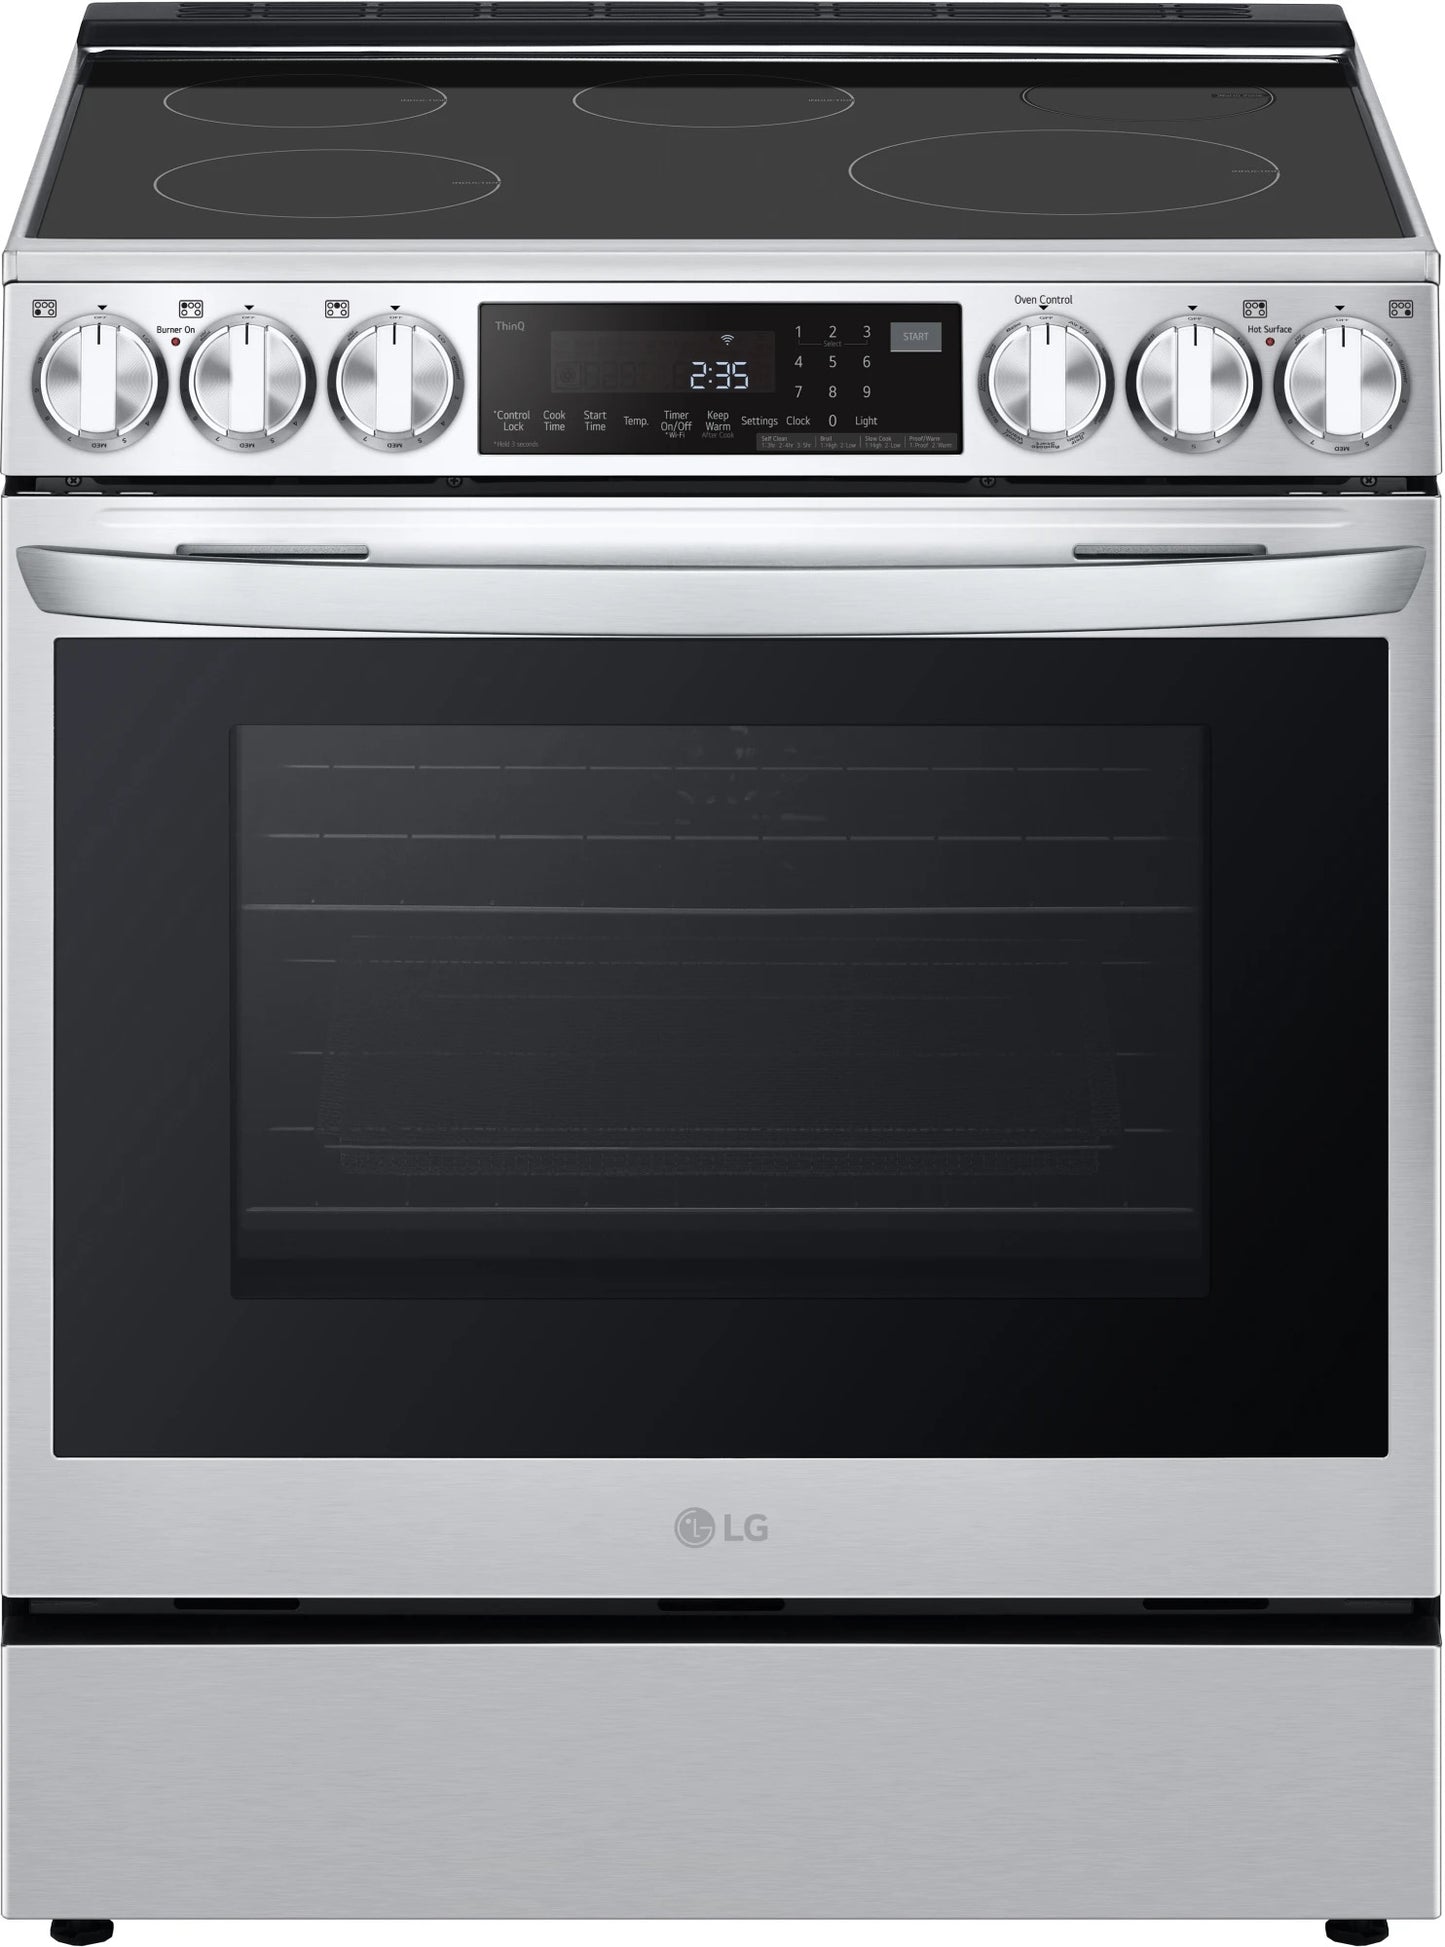 LG LSIL6336F 30 Inch Slide-in Induction Smart Range with 5 Radiant Elements, 6.3 cu. ft. Oven Capacity, Storage Drawer, ProBake Convection®, Air Fry, Sabbath Mode,Self+EasyClean, Wi-Fi, and InstaView 999469